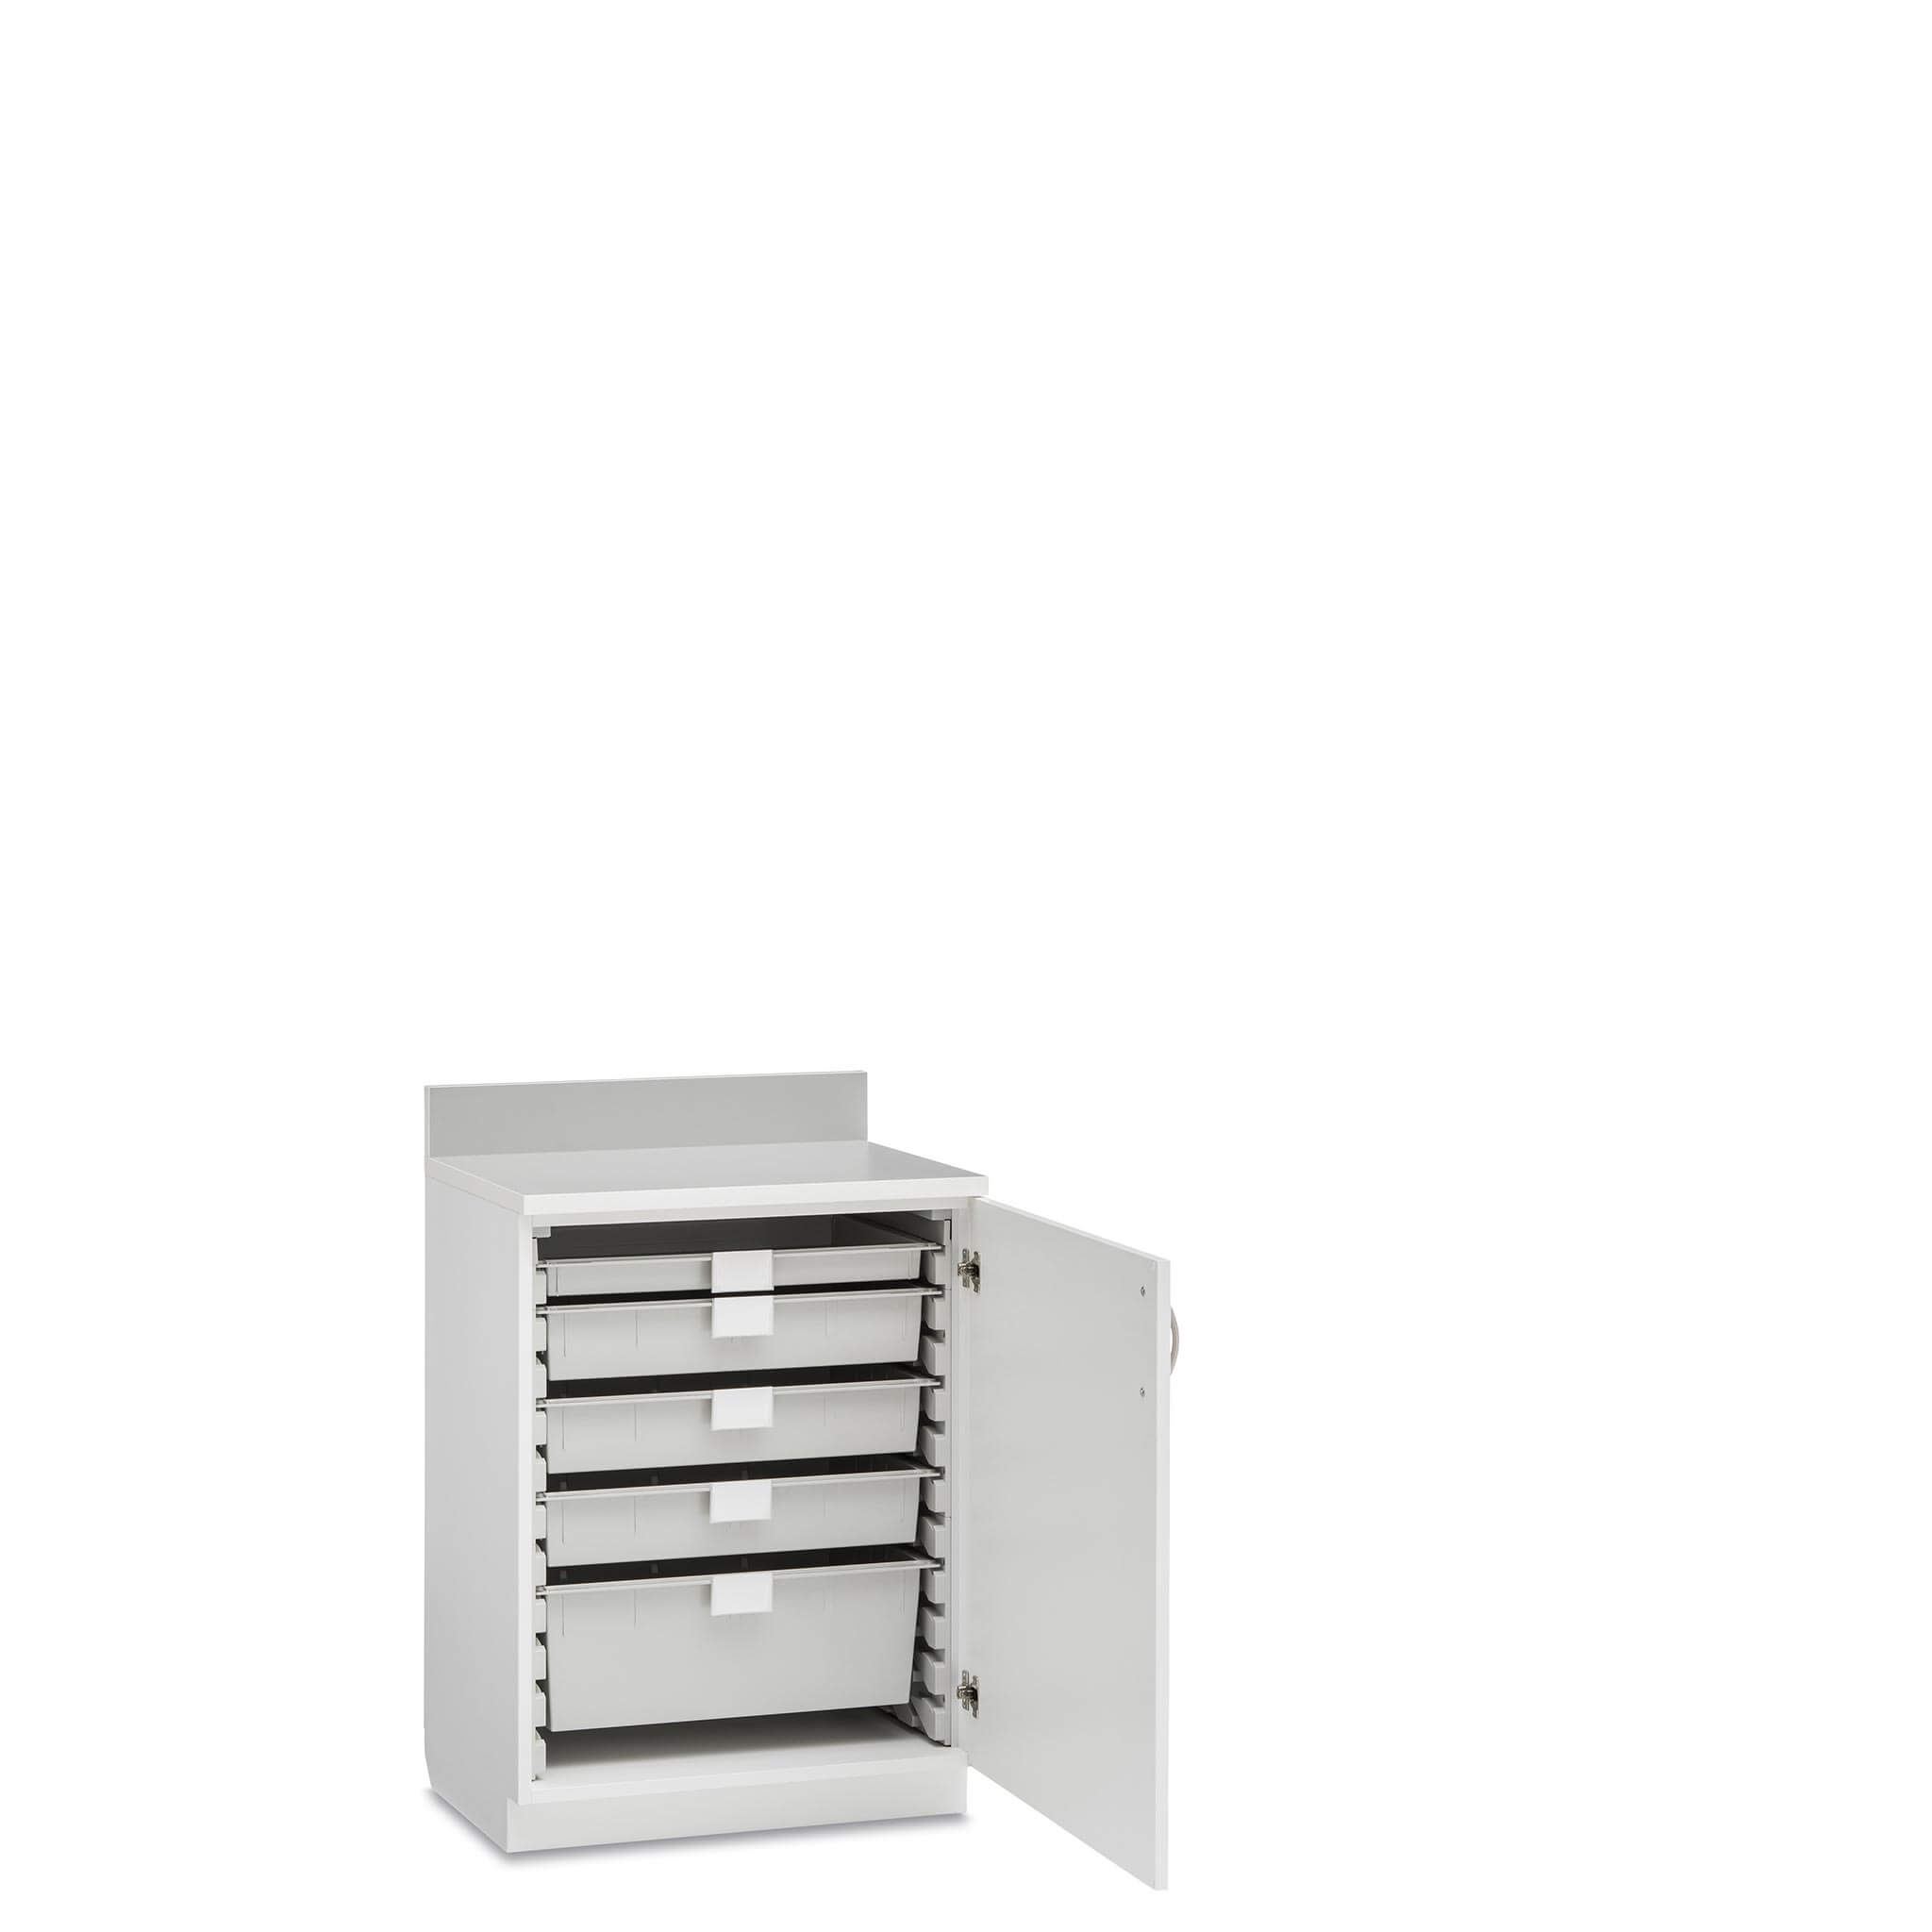 Base Cabinet with FlexCell | Healthcare Cabinets | InnerSpace by Solaire